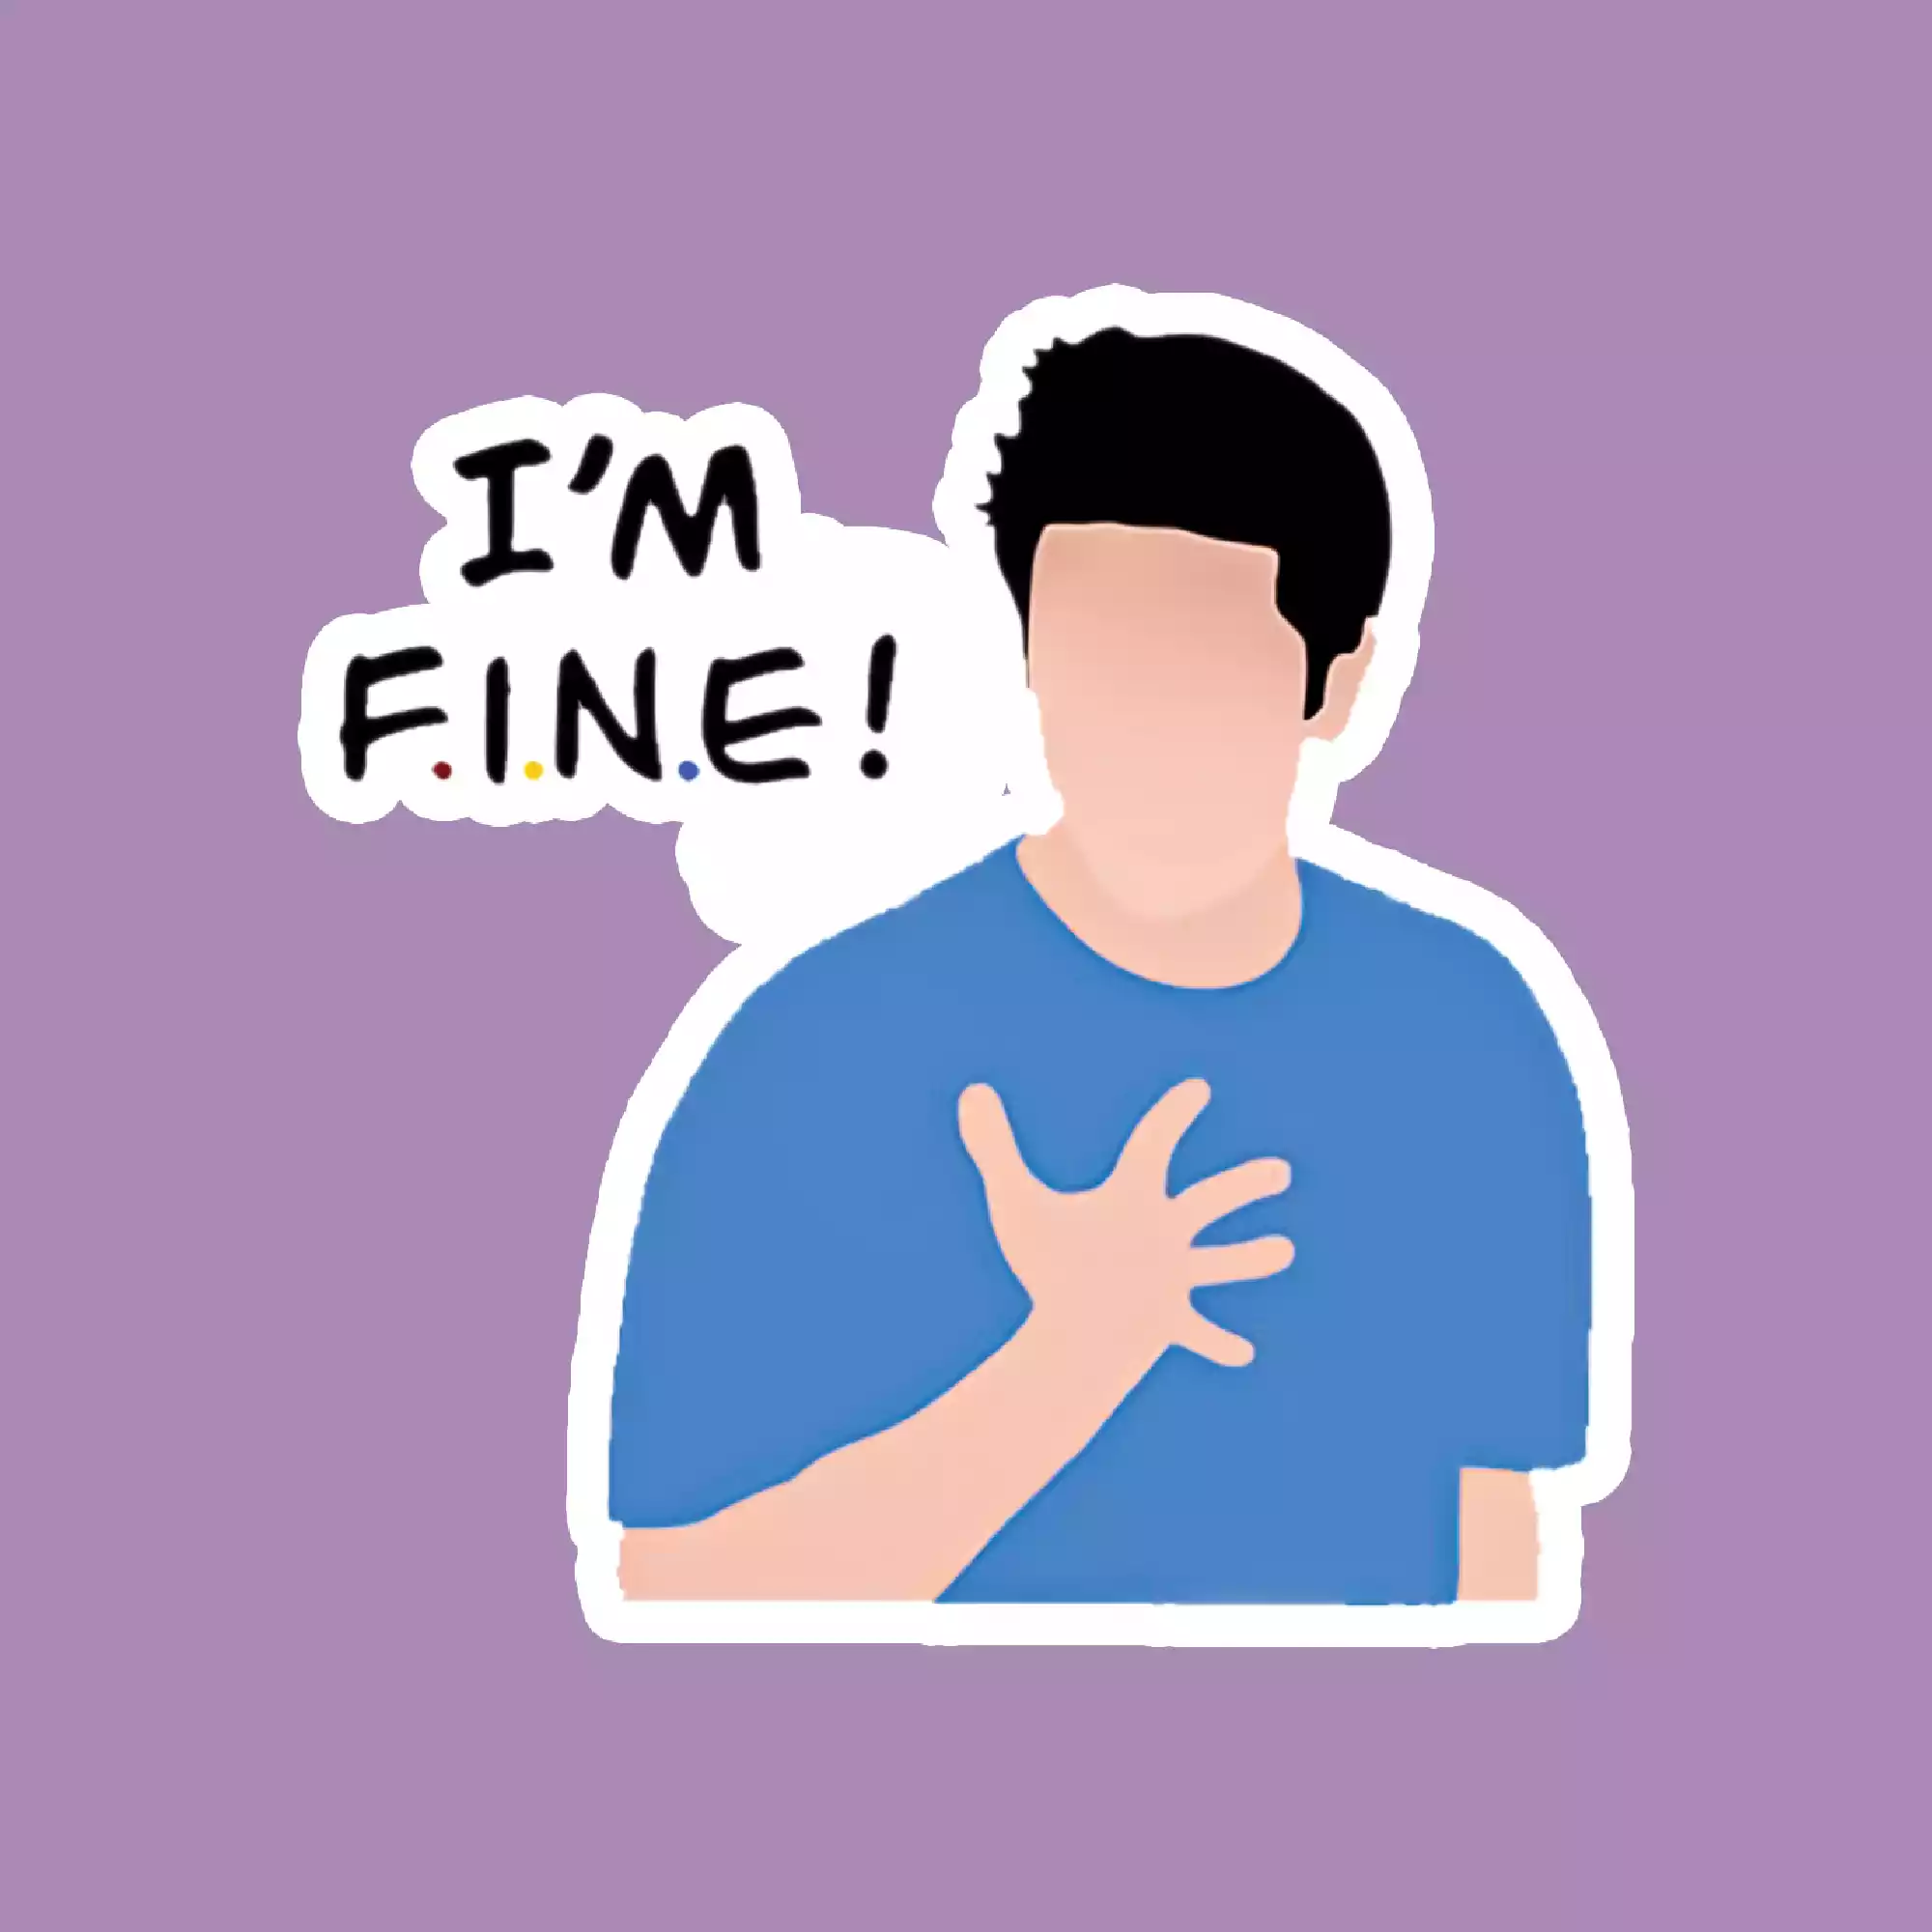 Image with i'm fine sticker from the famous tv show Friends.